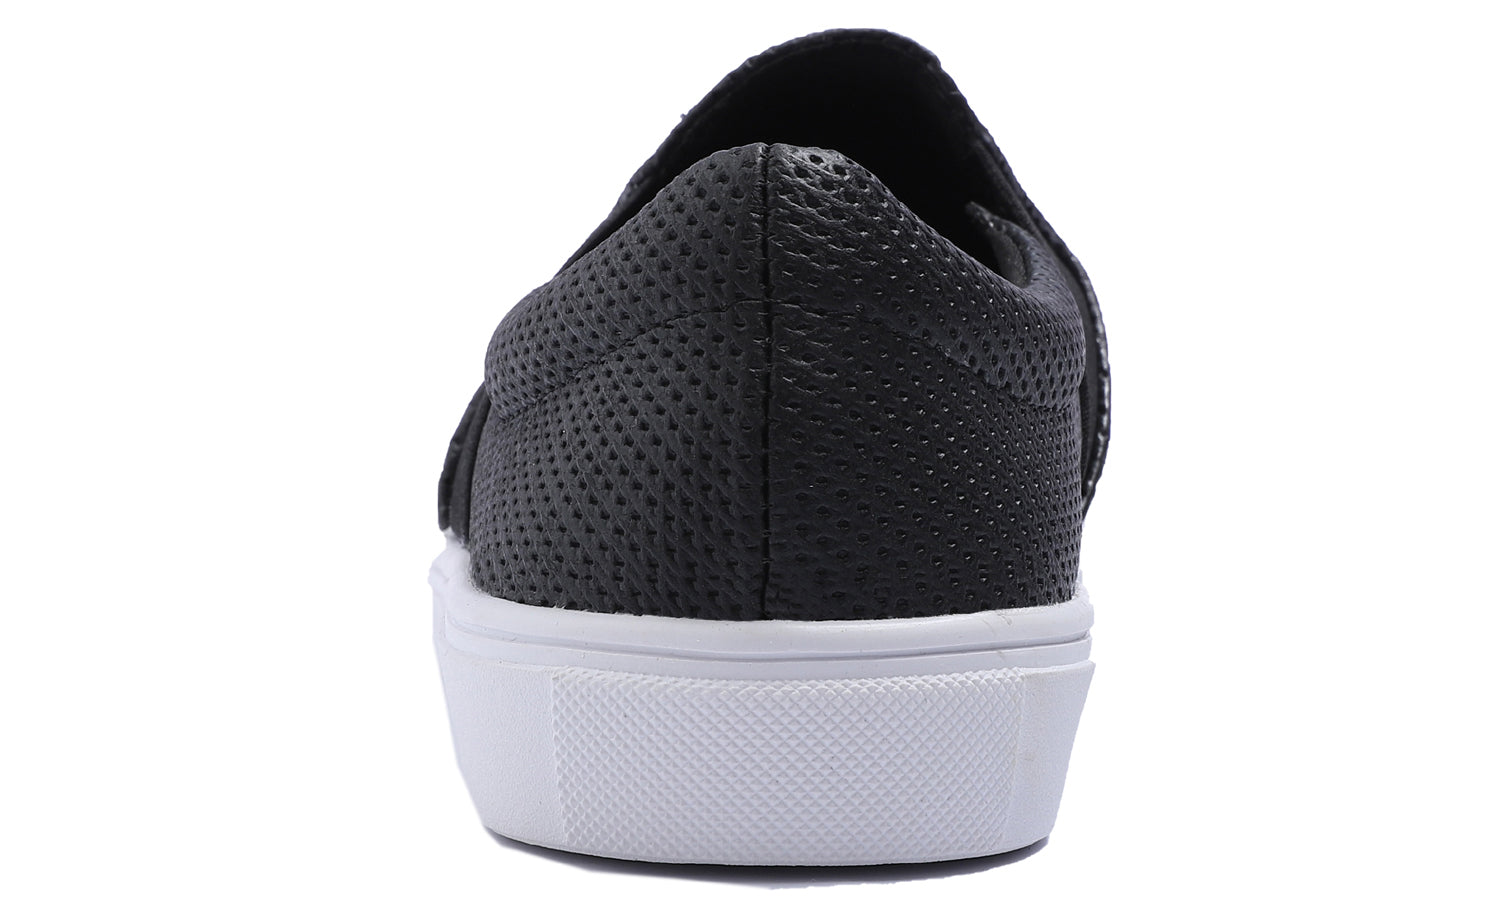 Feversole Women's Casual Slip On Sneaker Comfort Cupsole Loafer Flats Black Perforated Elastic